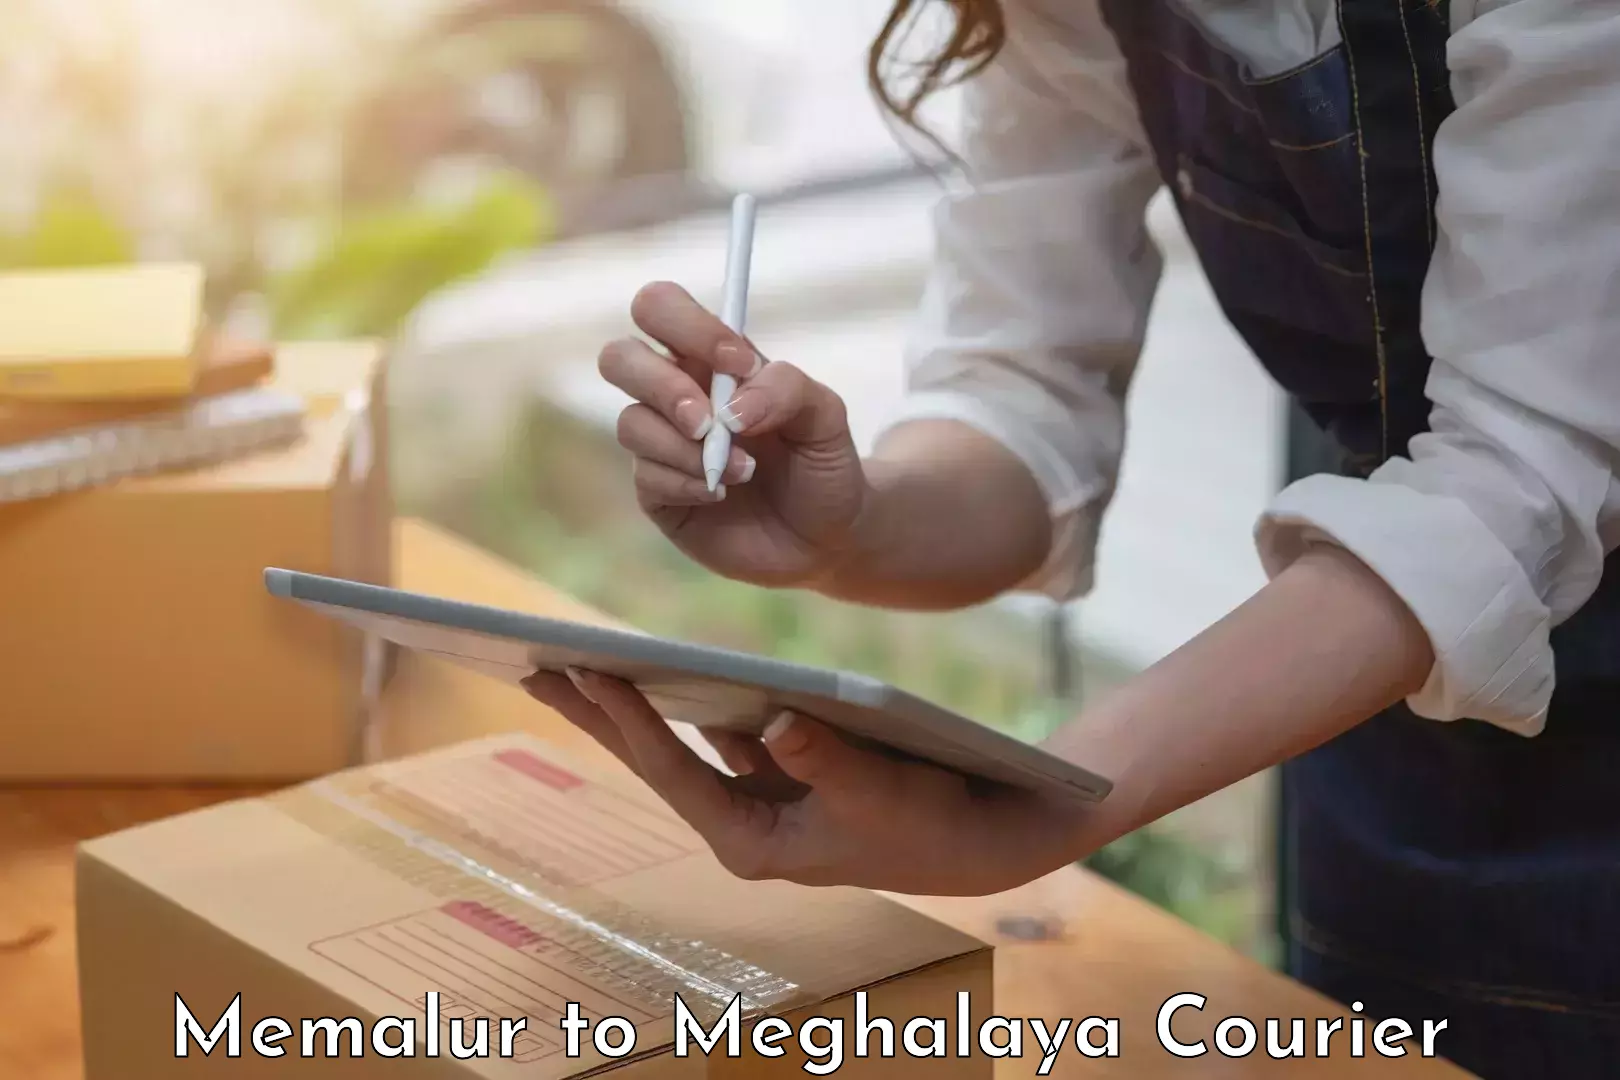 Efficient relocation services in Memalur to Meghalaya